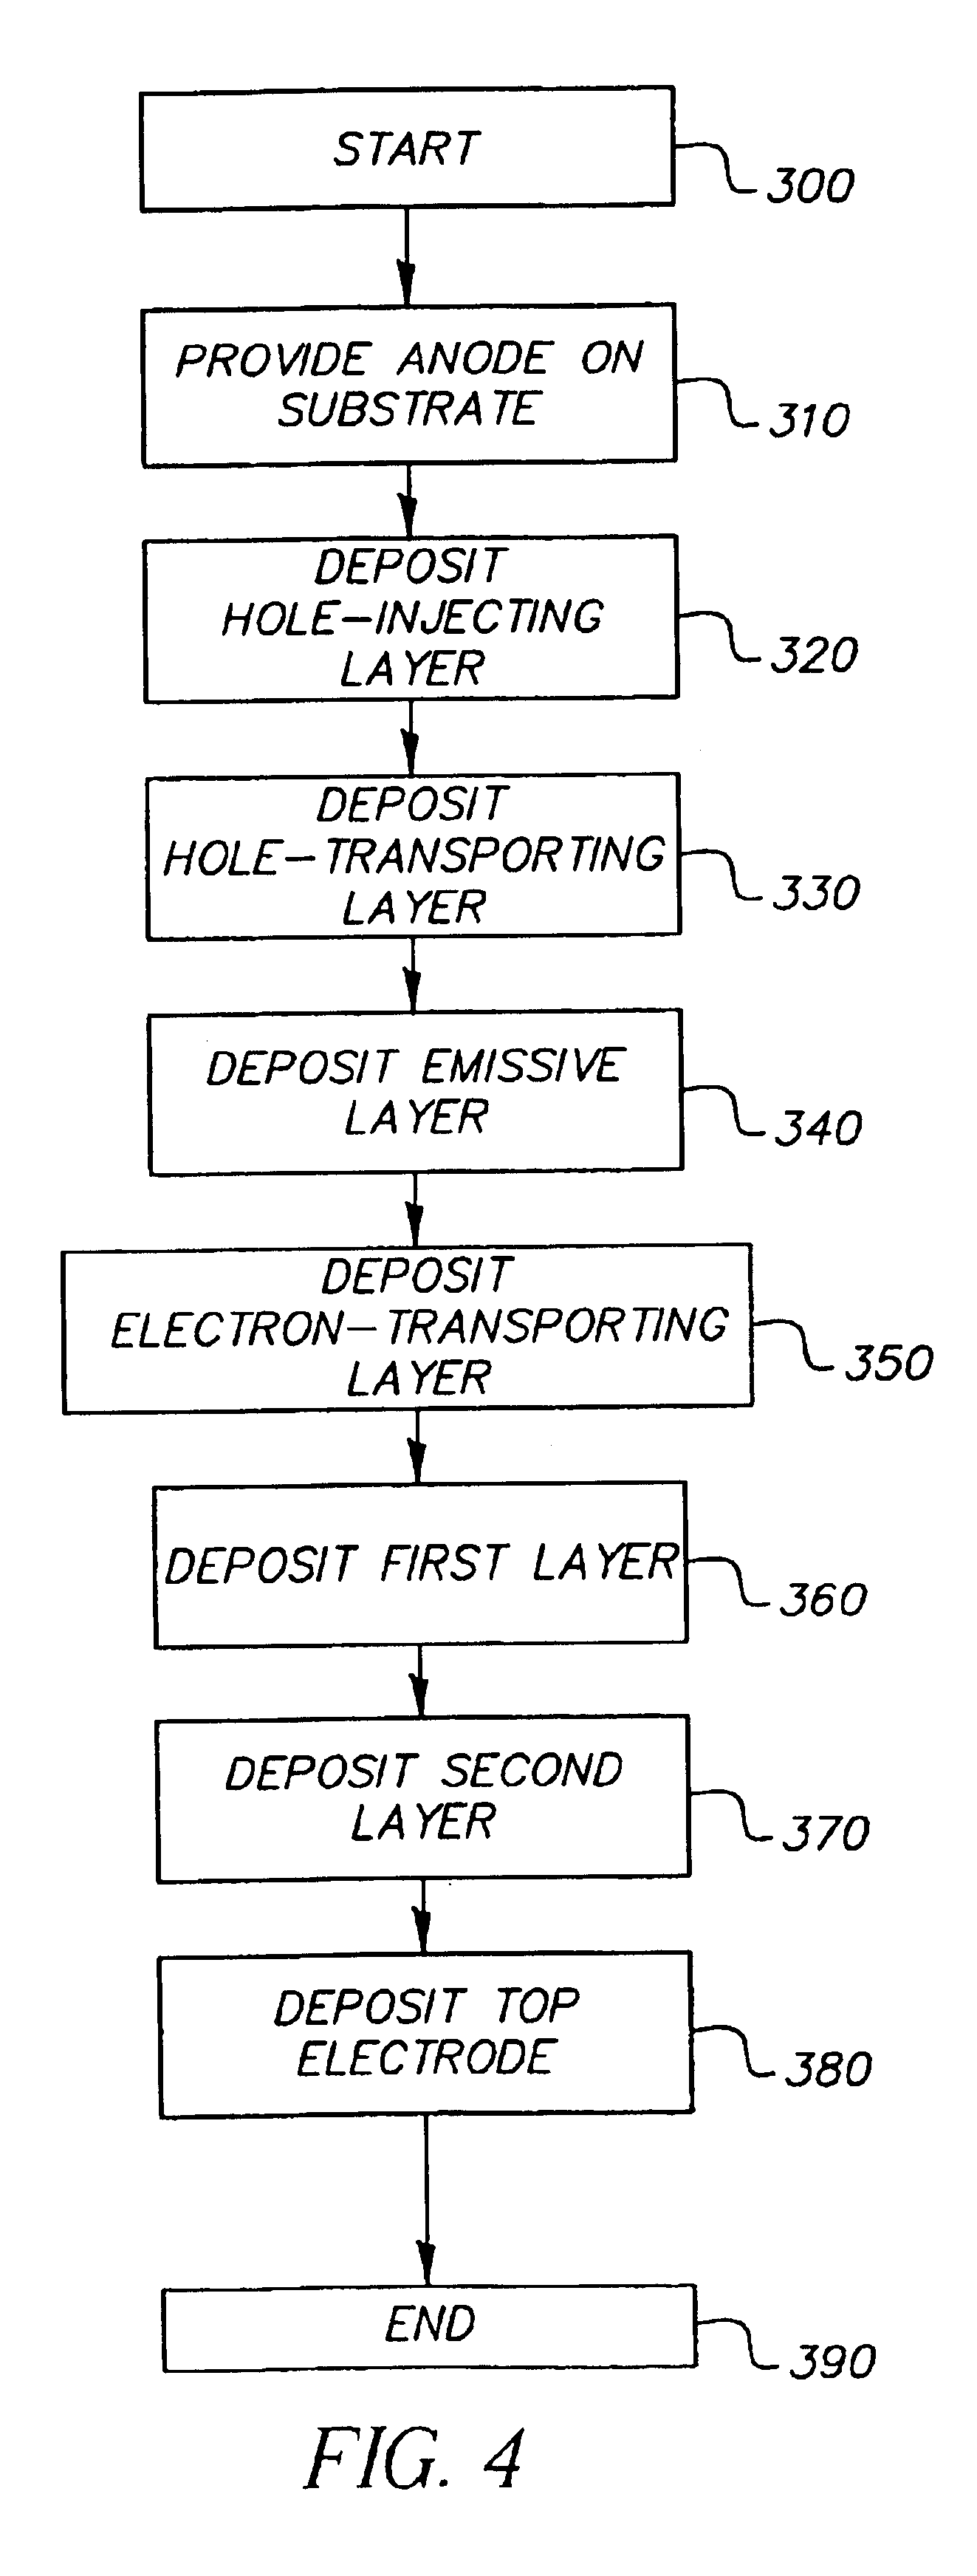 Highly transparent top electrode for OLED device